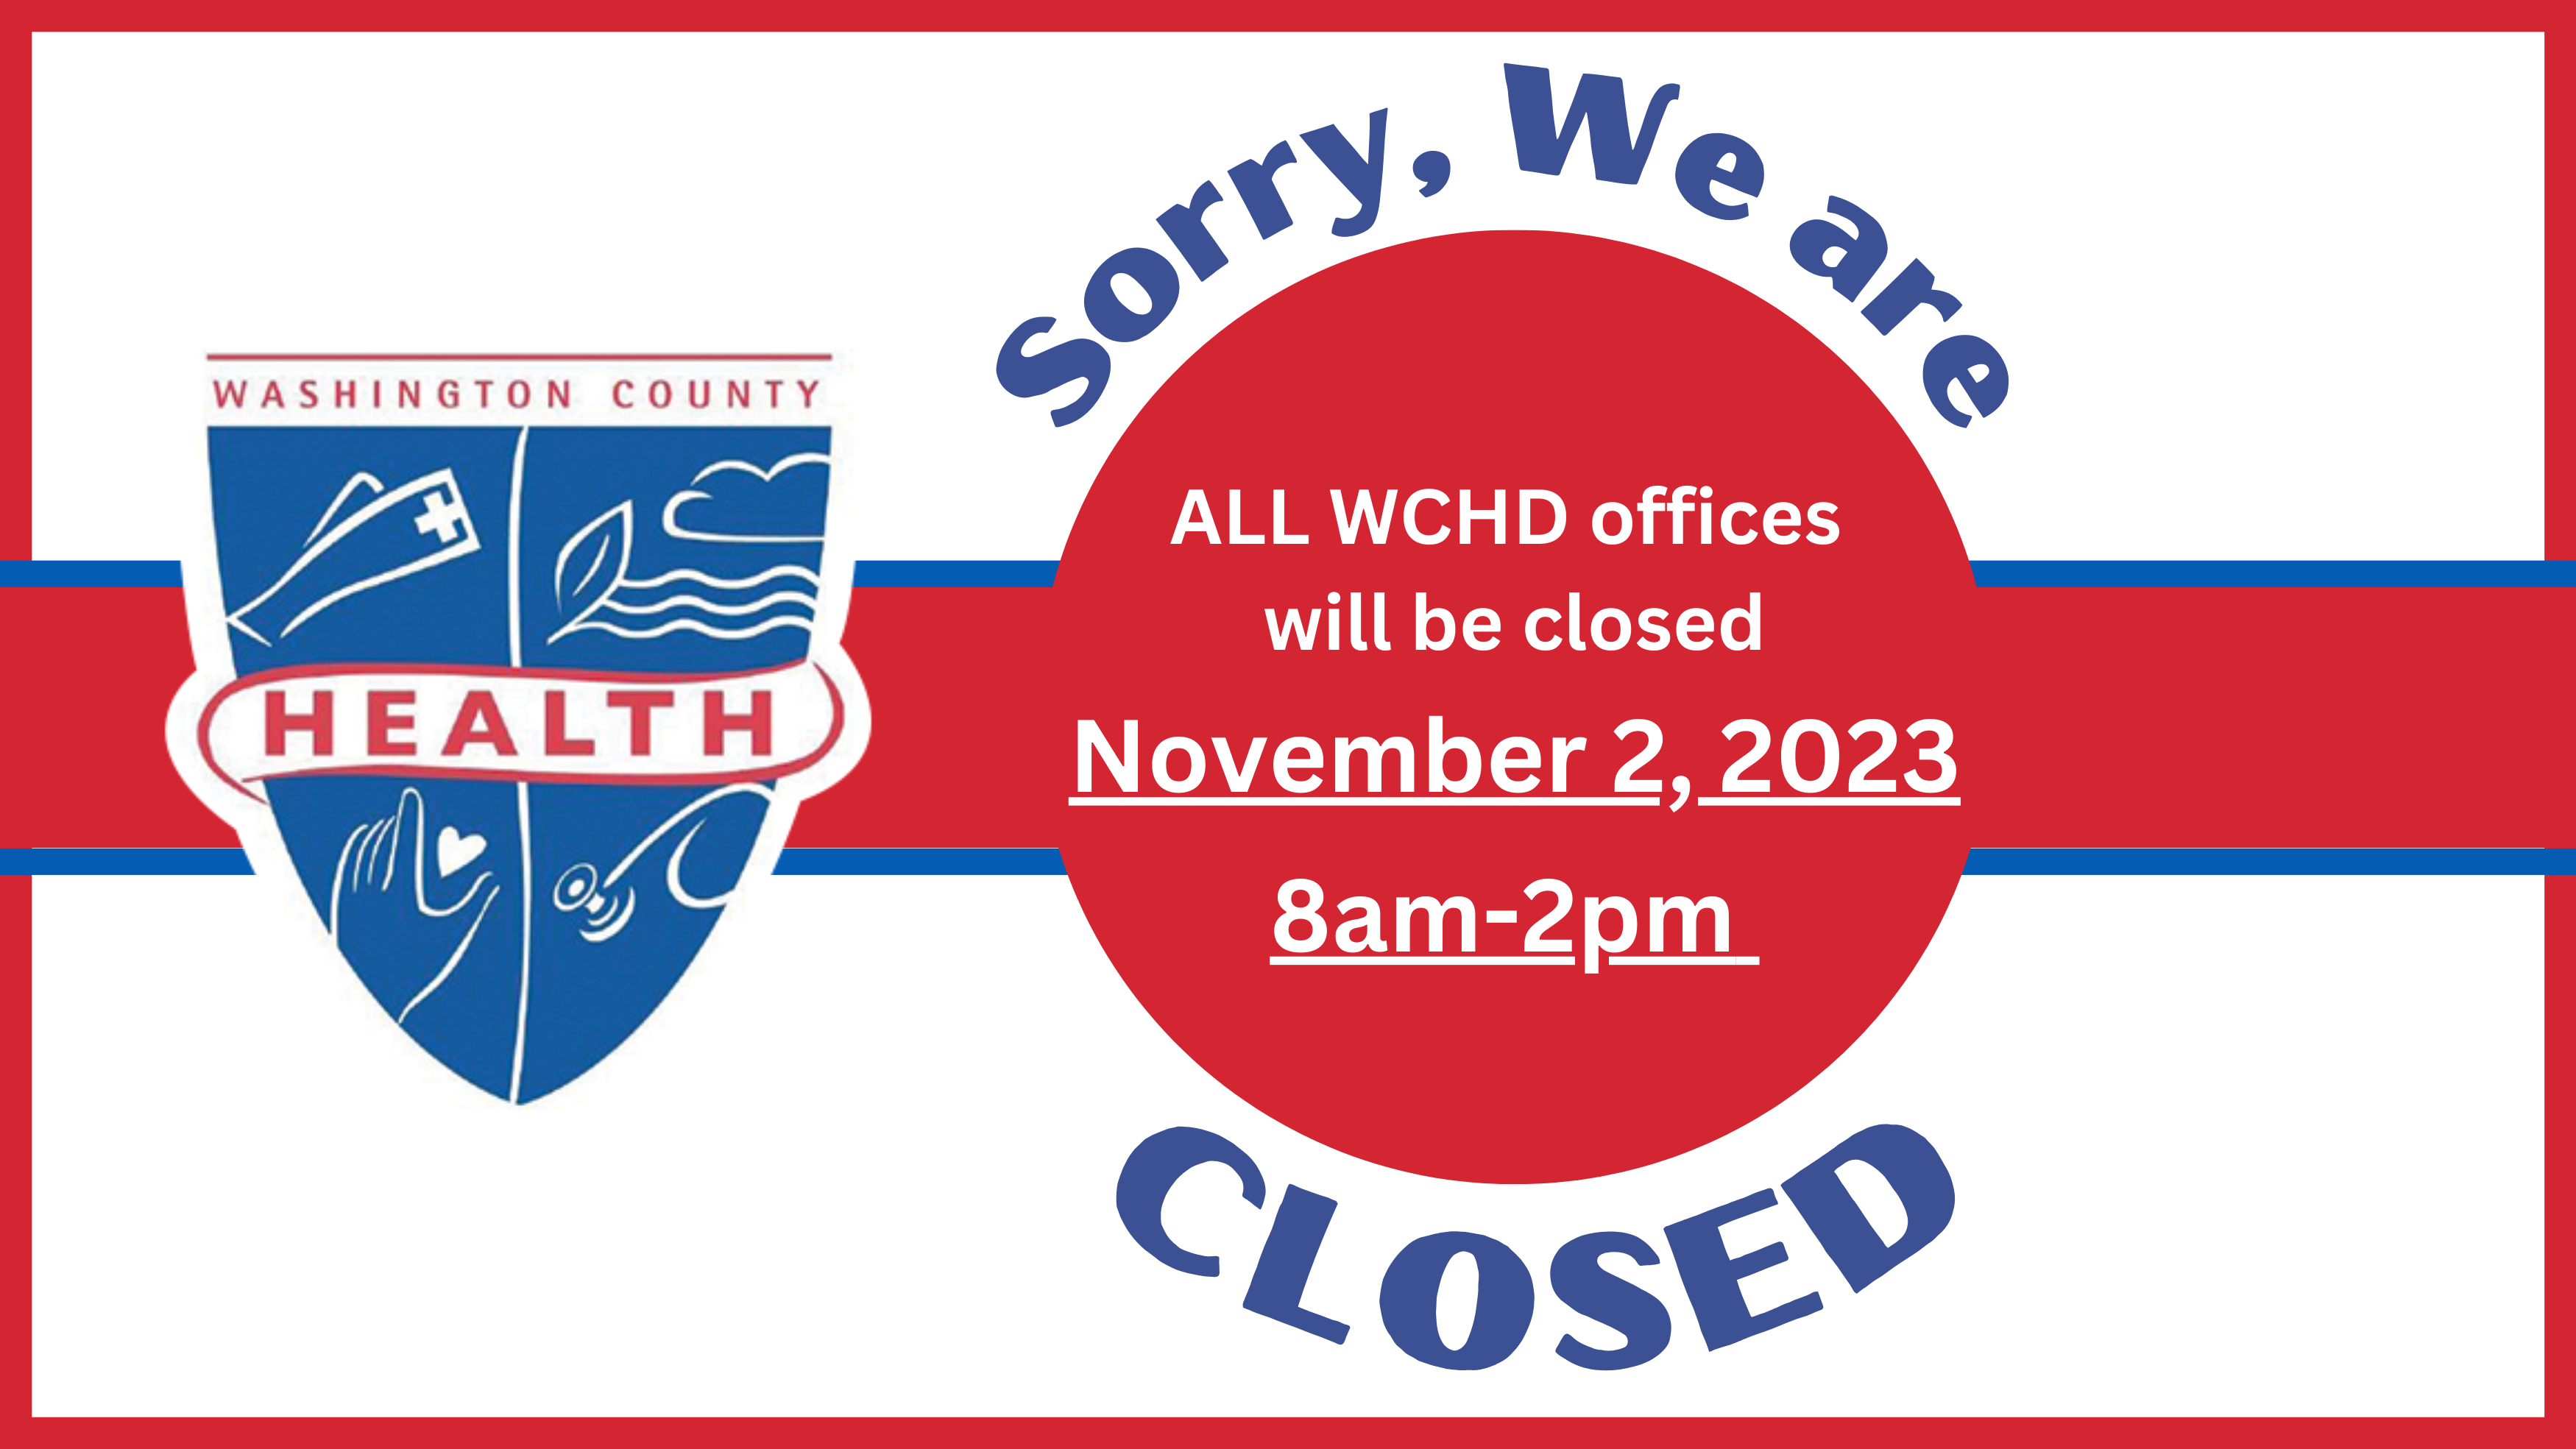 whcd logo with red circle with the words: Sorry. we are closed.